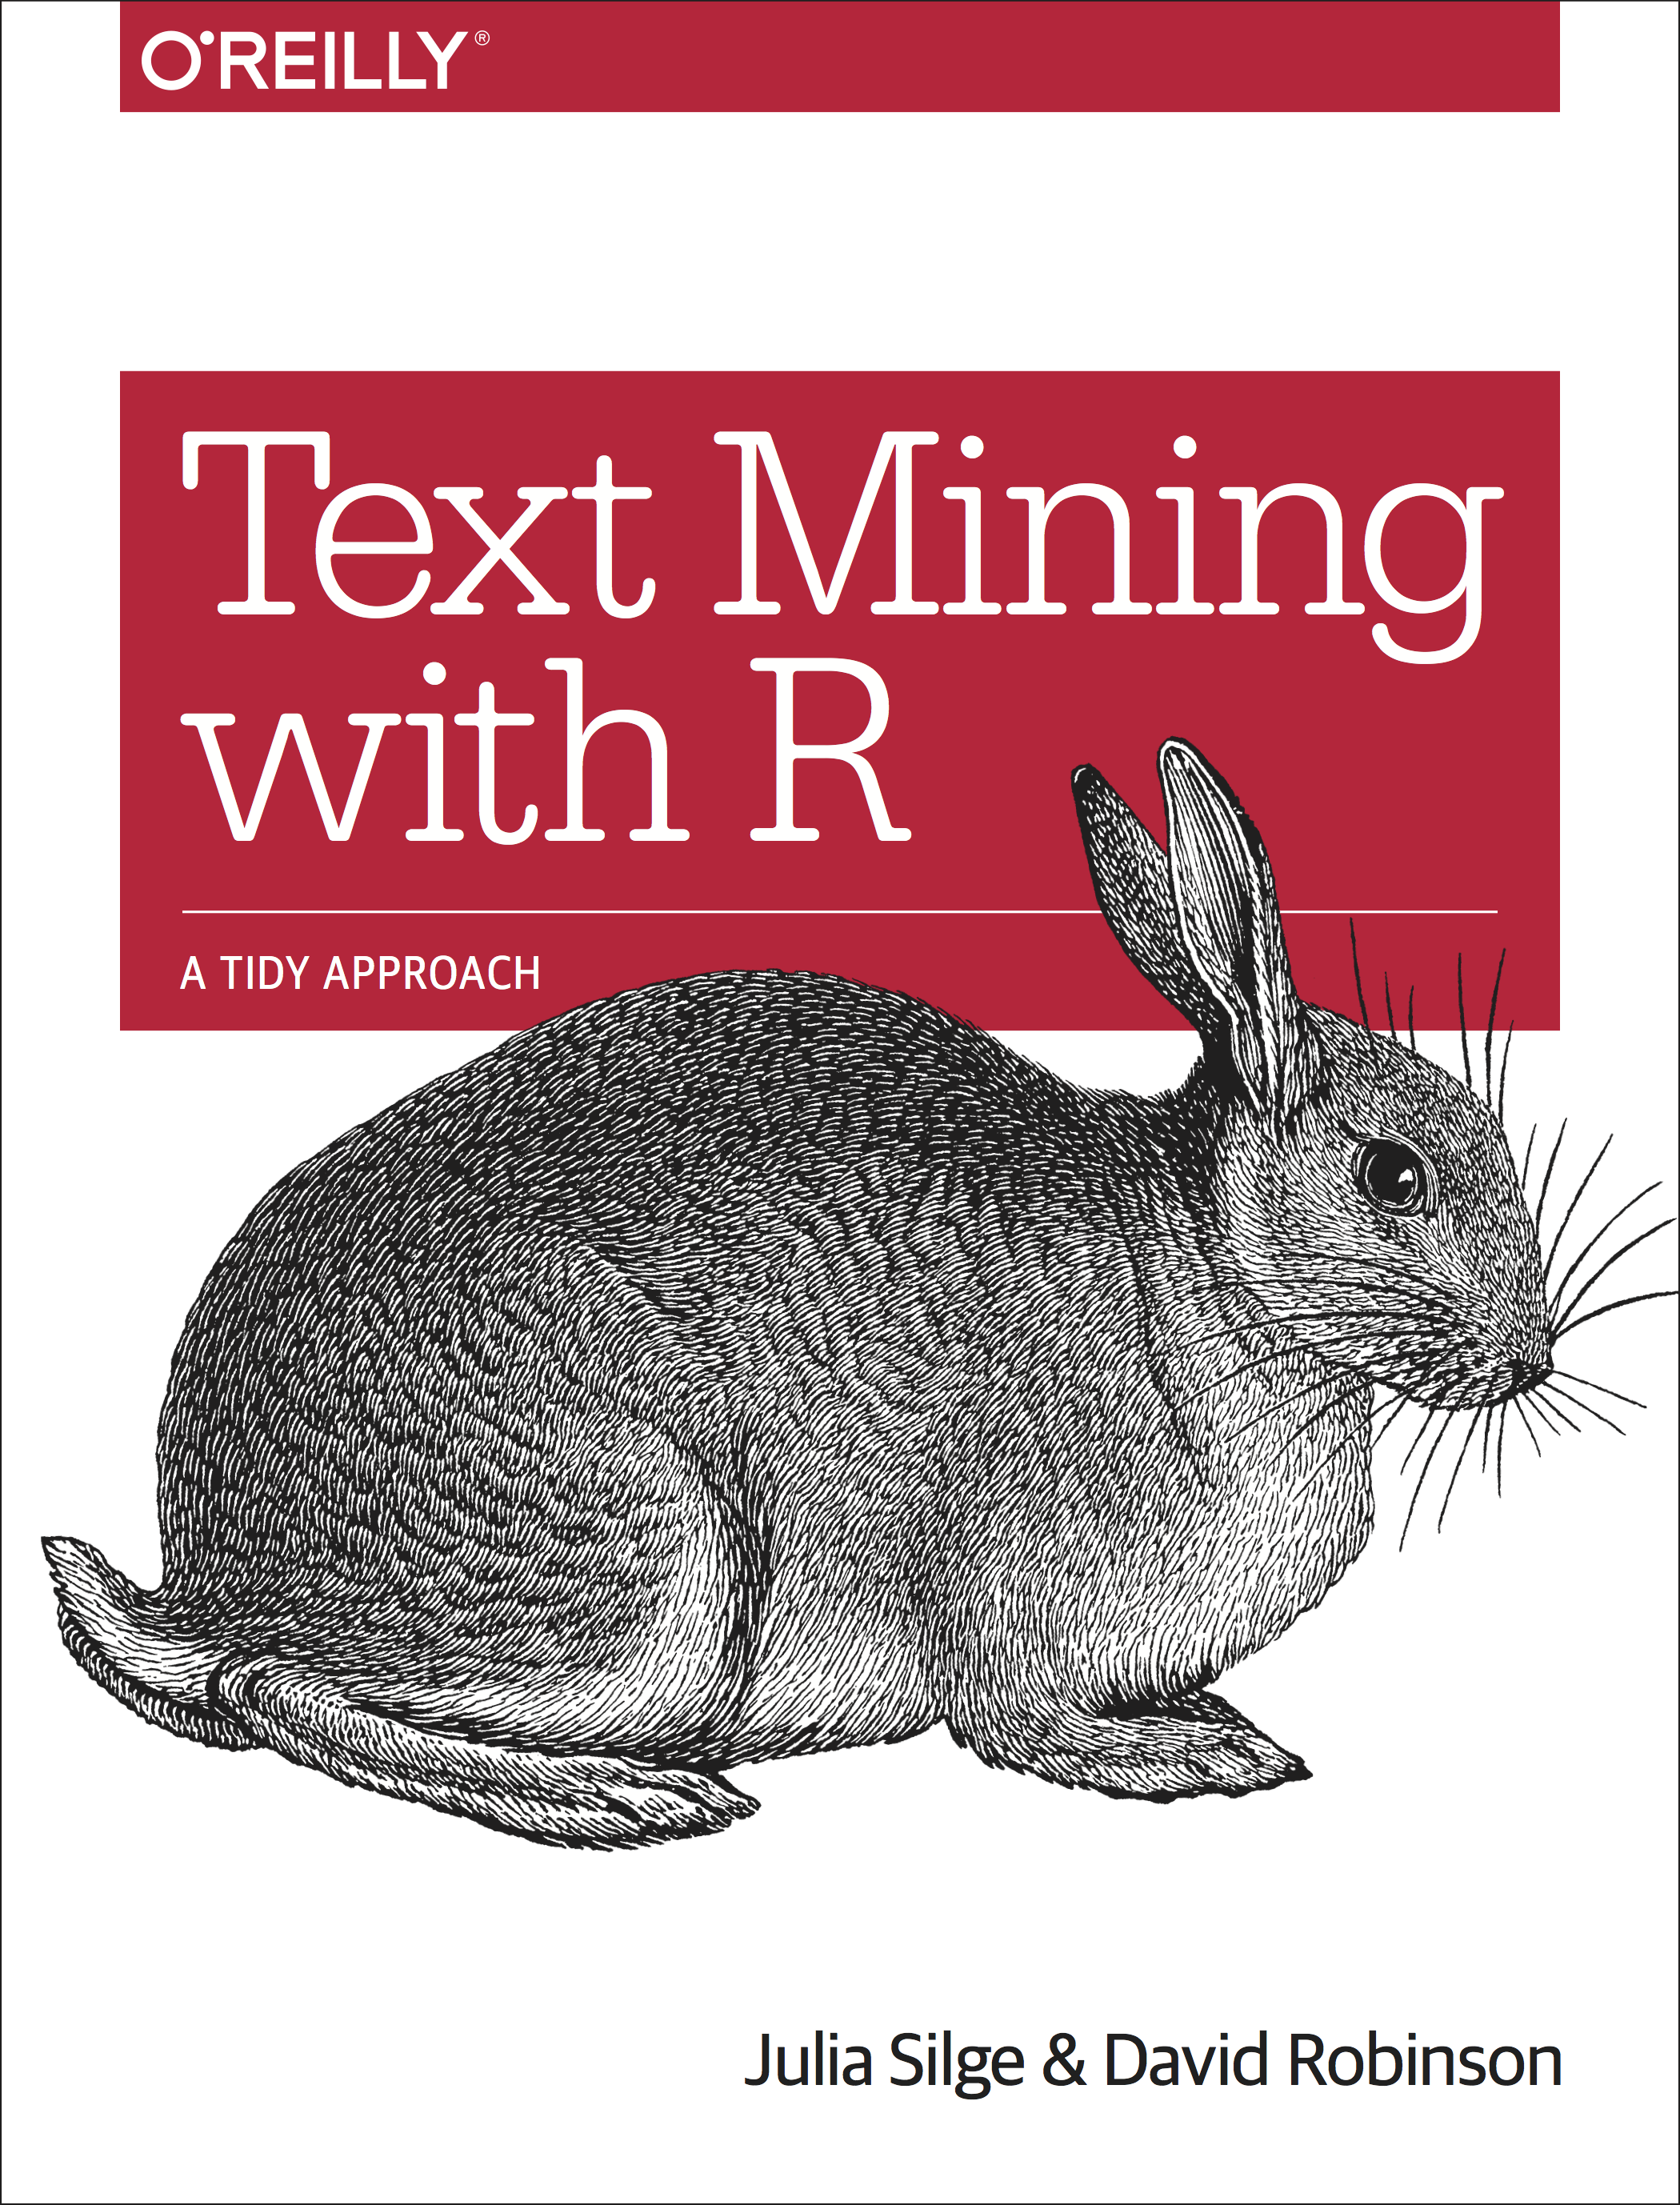 Text Mining Twitter Data With TidyText in R | Earth Data Science - Earth Lab